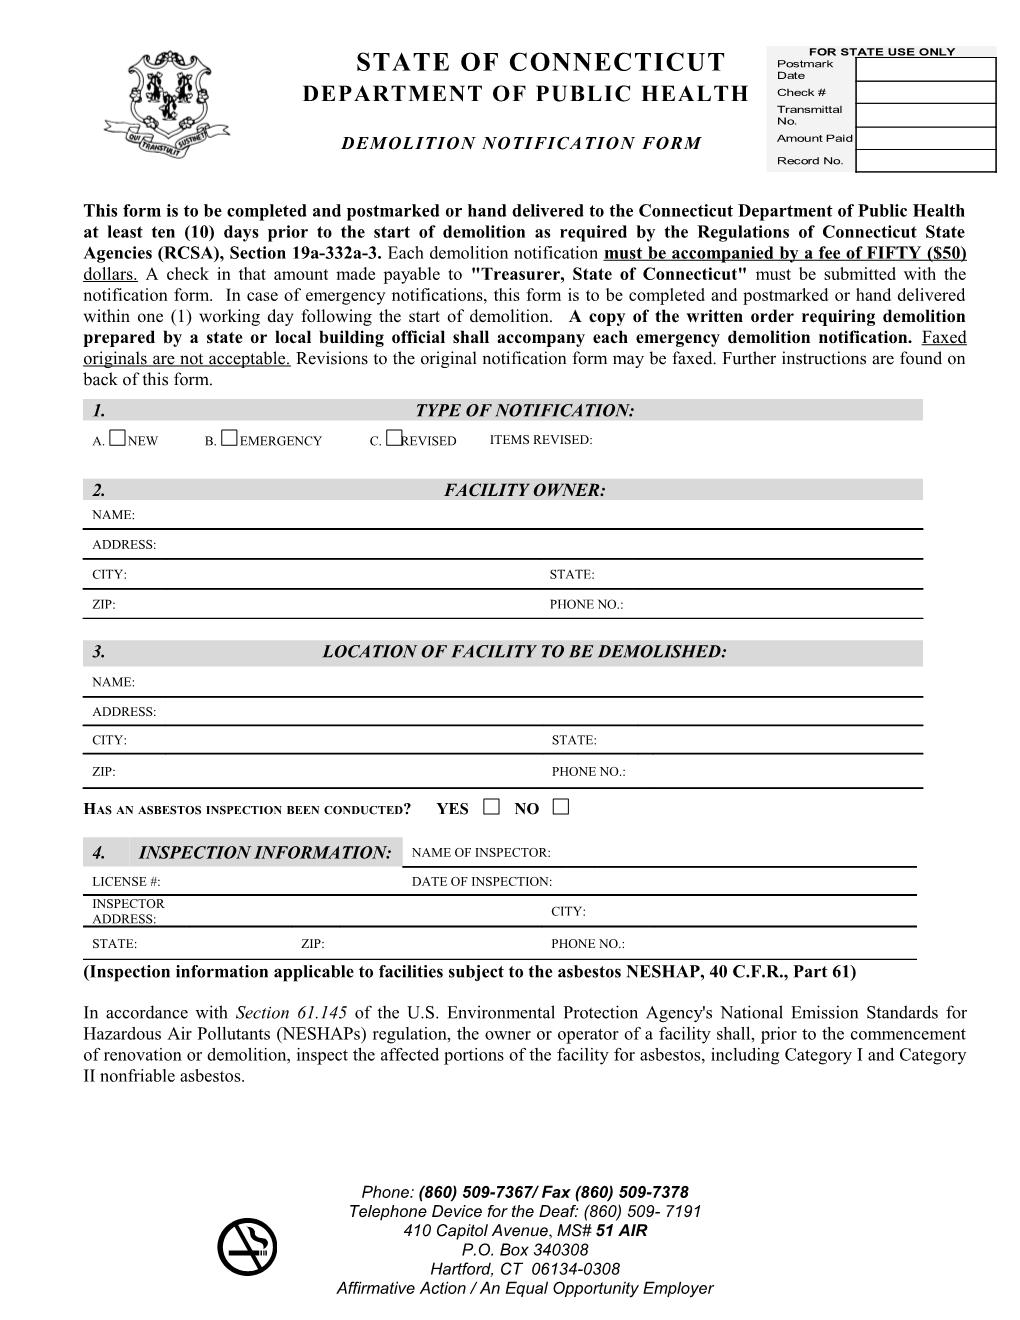 This Form Is to Be Completed, Postmarked and Filed with the Connecticut Ddemolition Notification